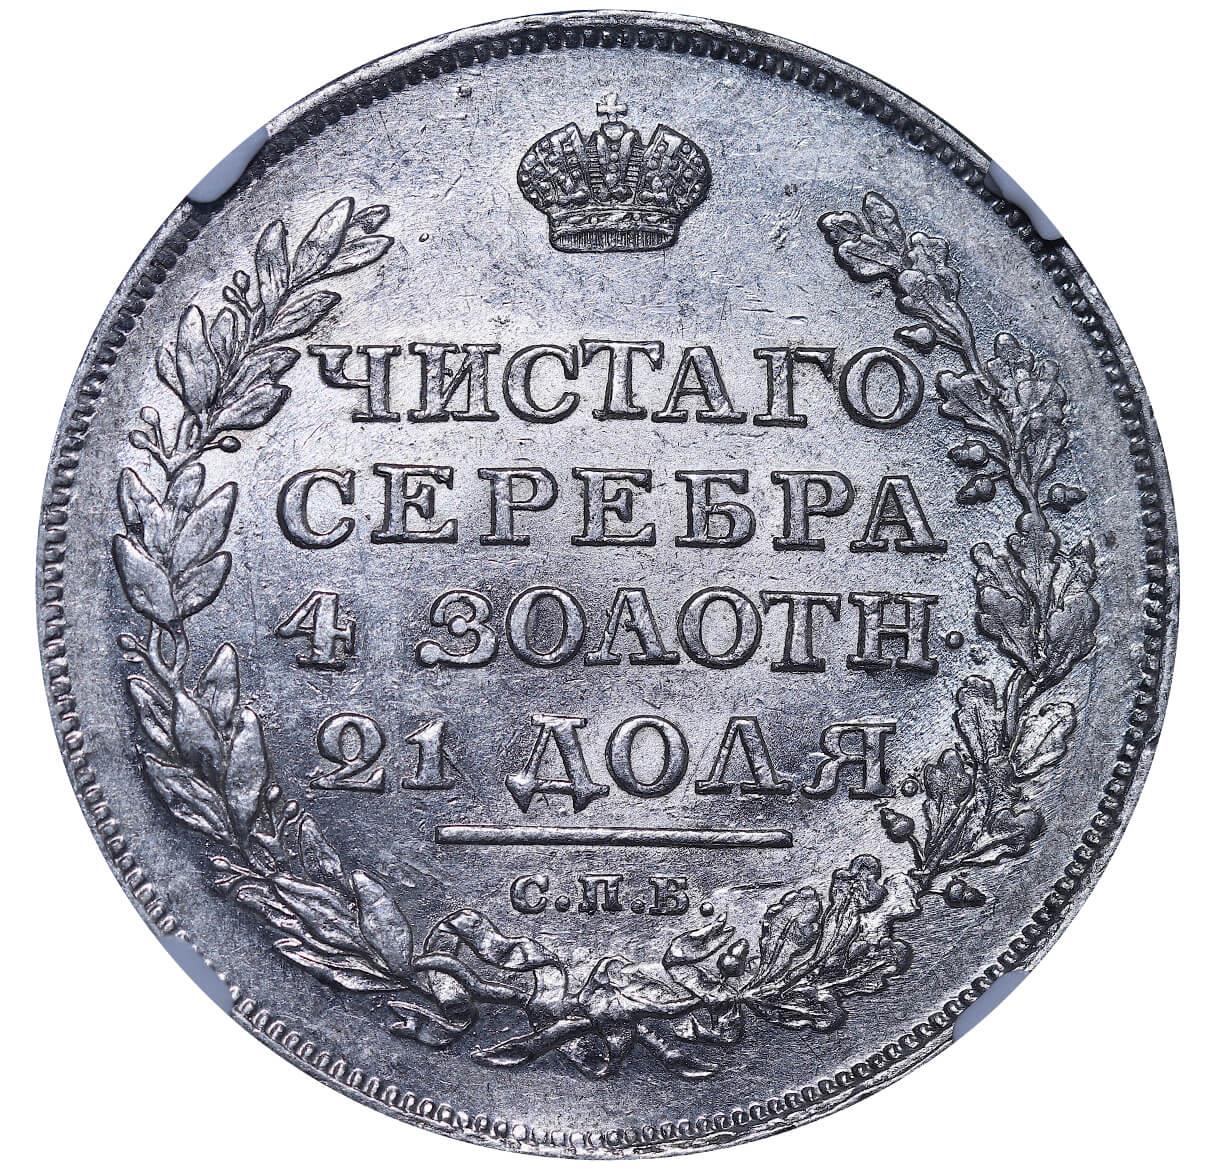 Russian Empire, 1 Rouble, 1815 year, SPB-MF, NGC, AU 58 - Image 3 of 3